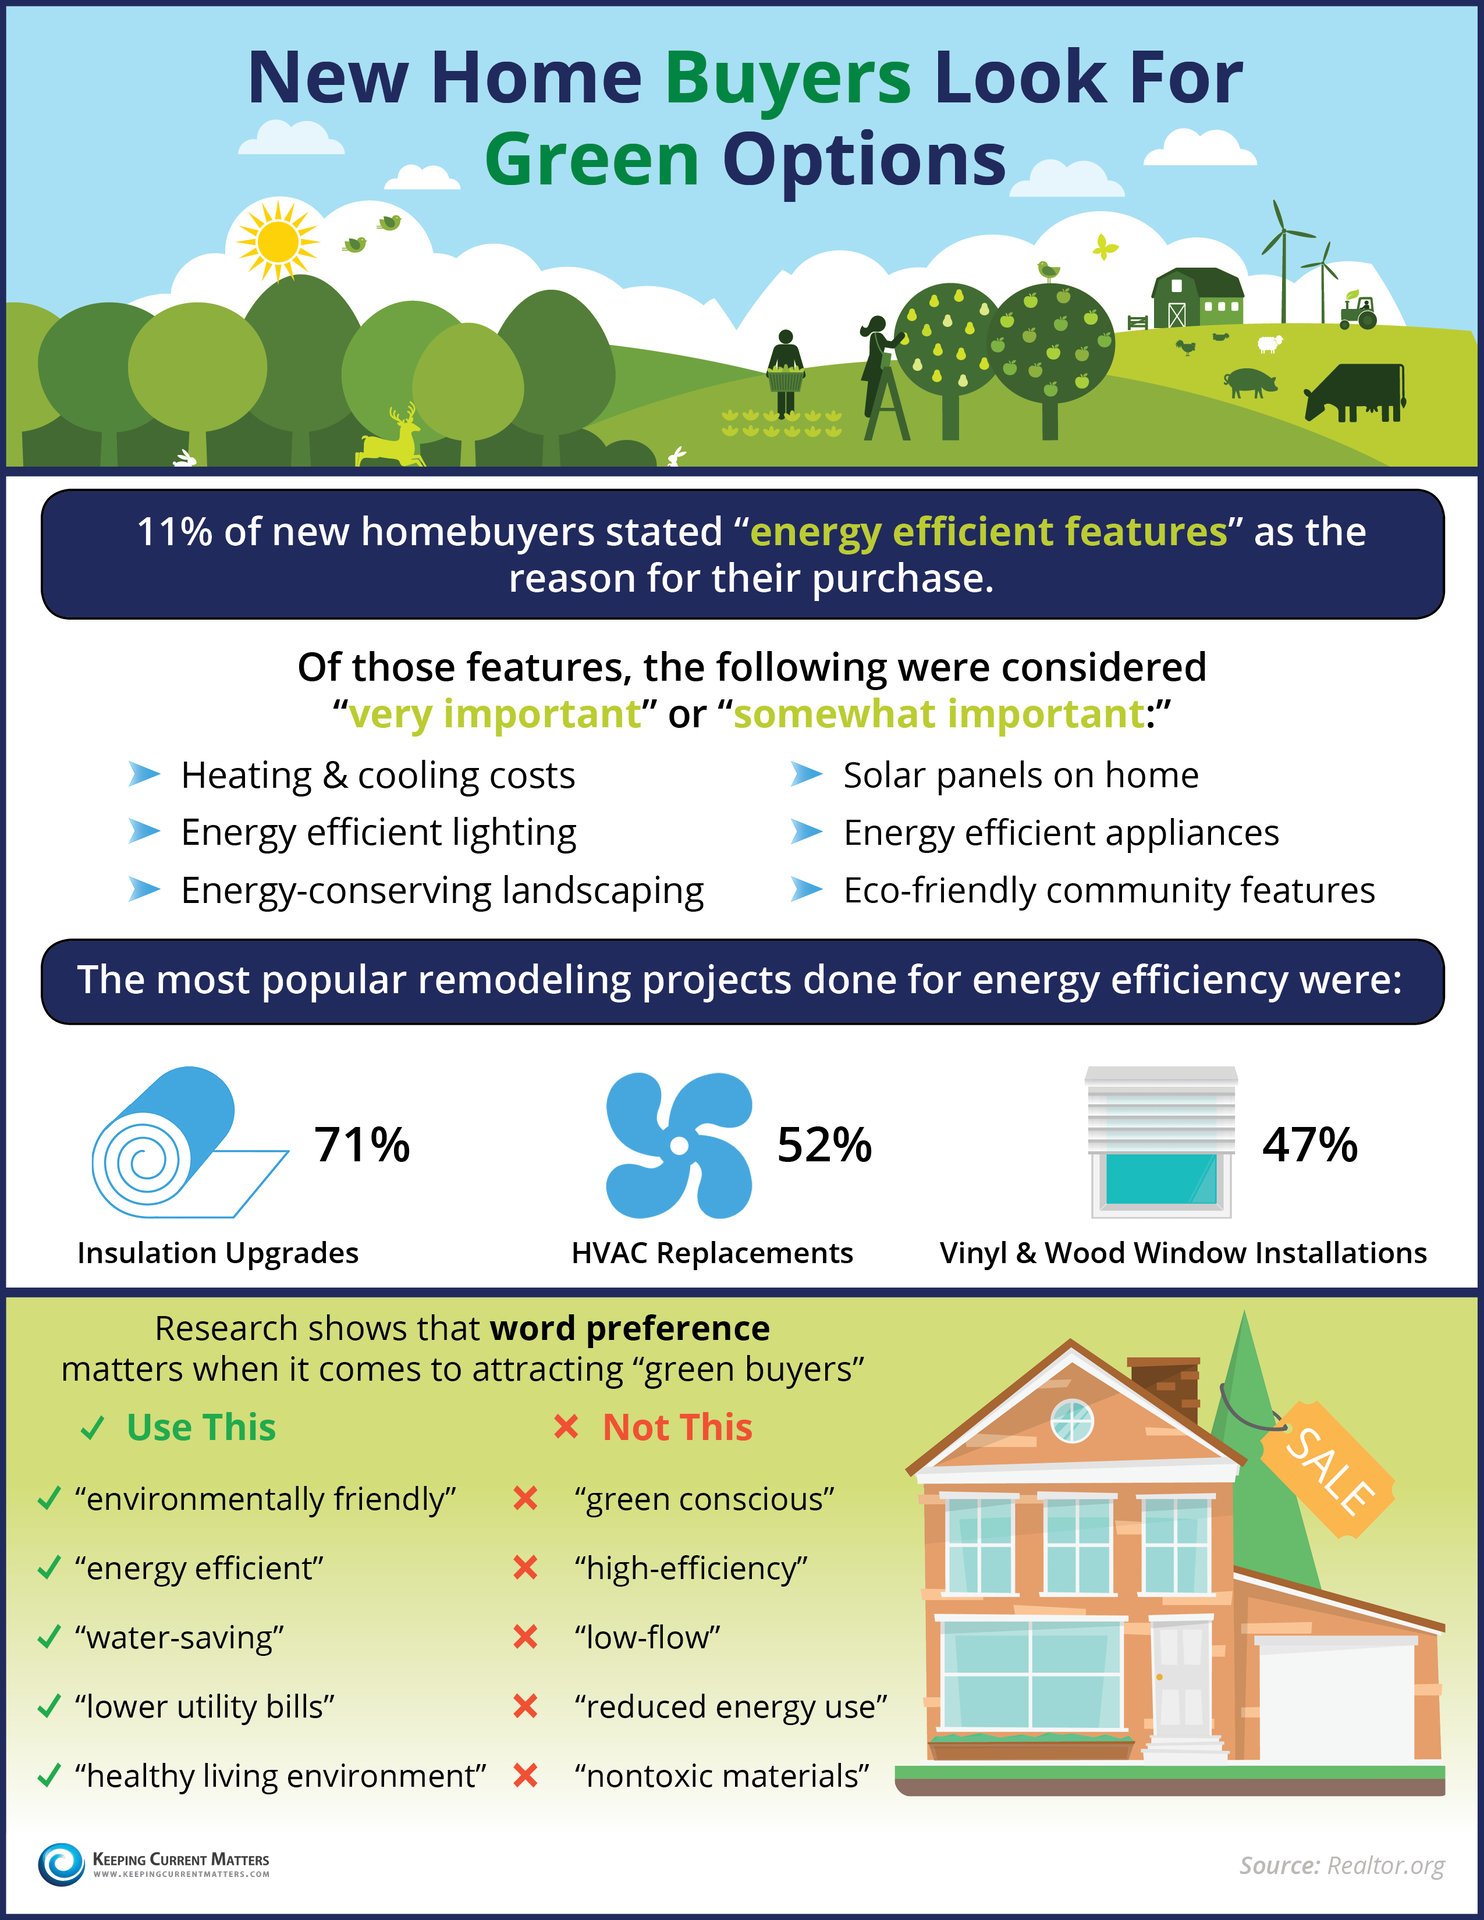 New Home Buyers Look For Green Options | Keeping Current Matters